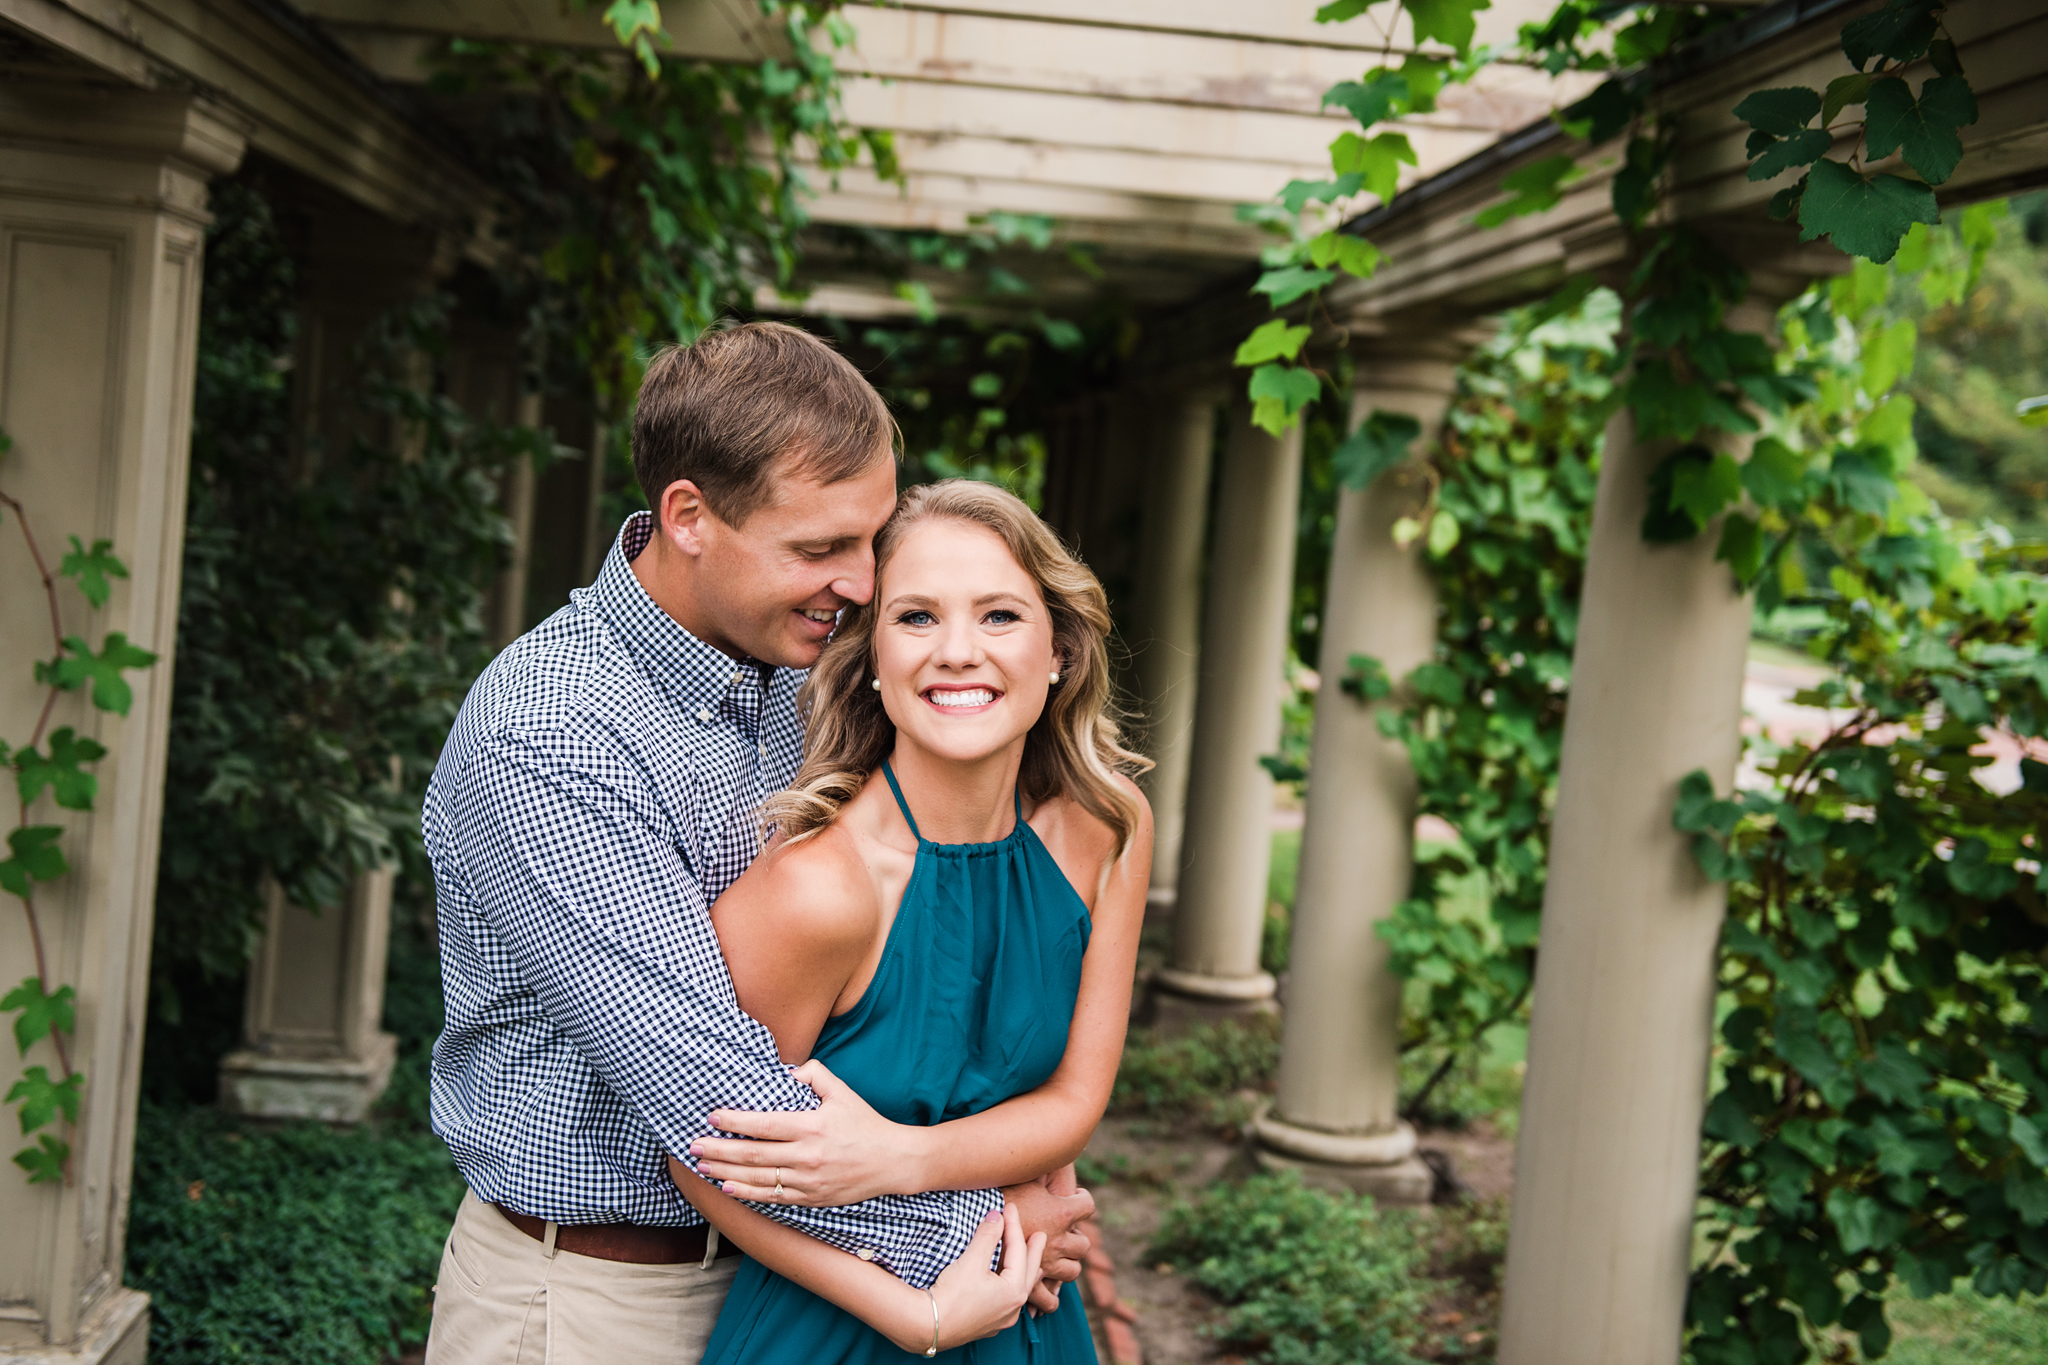 George_Eastman_House_Rochester_Yacht_Club_Rochester_Engagement_Session_JILL_STUDIO_Rochester_NY_Photographer_DSC_8125.jpg